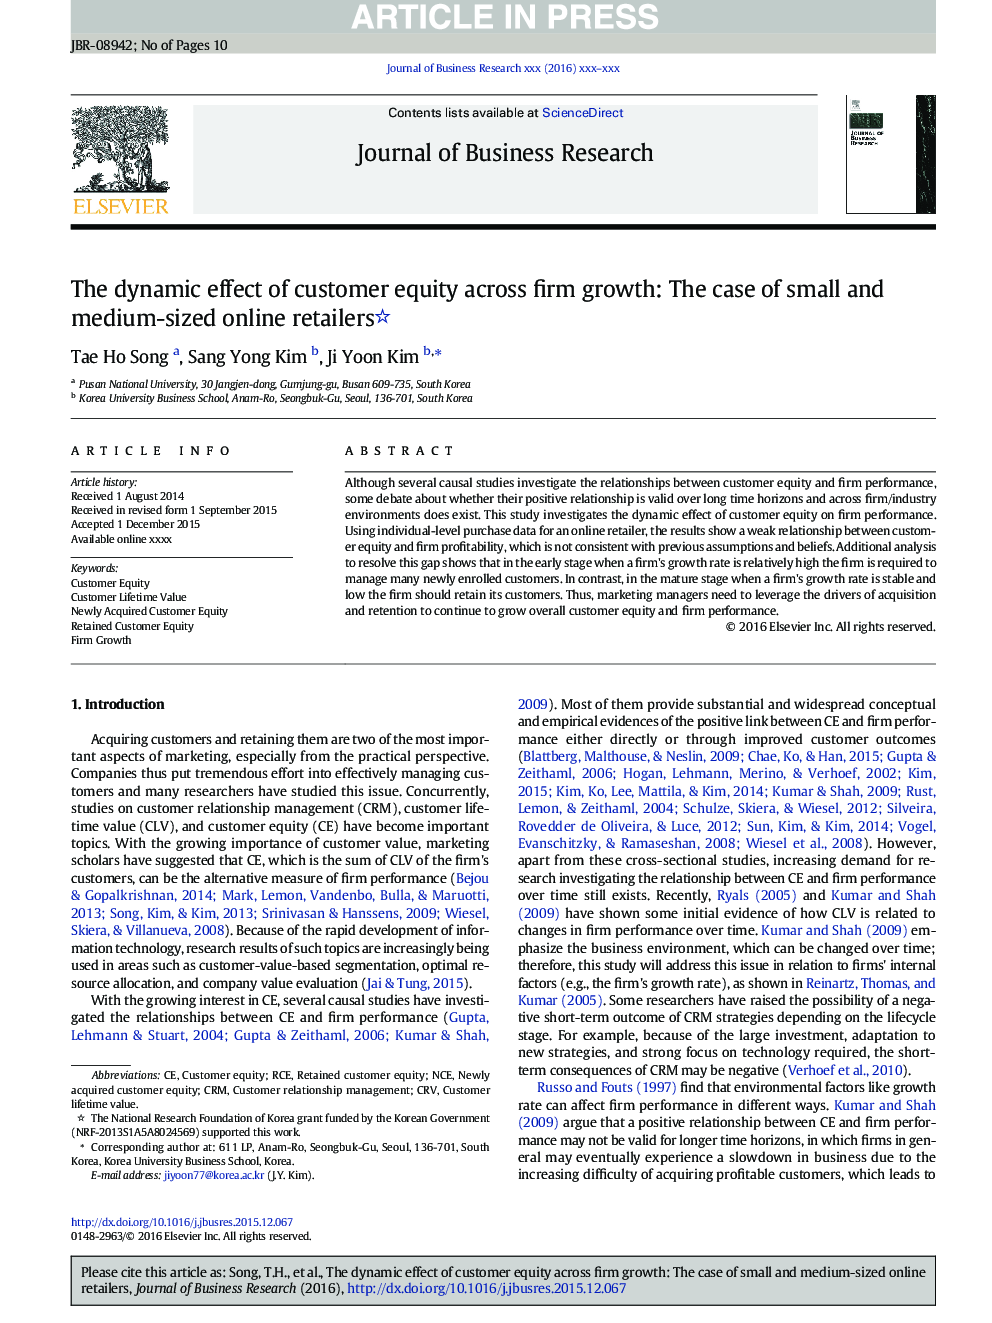 The dynamic effect of customer equity across firm growth: The case of small and medium-sized online retailers